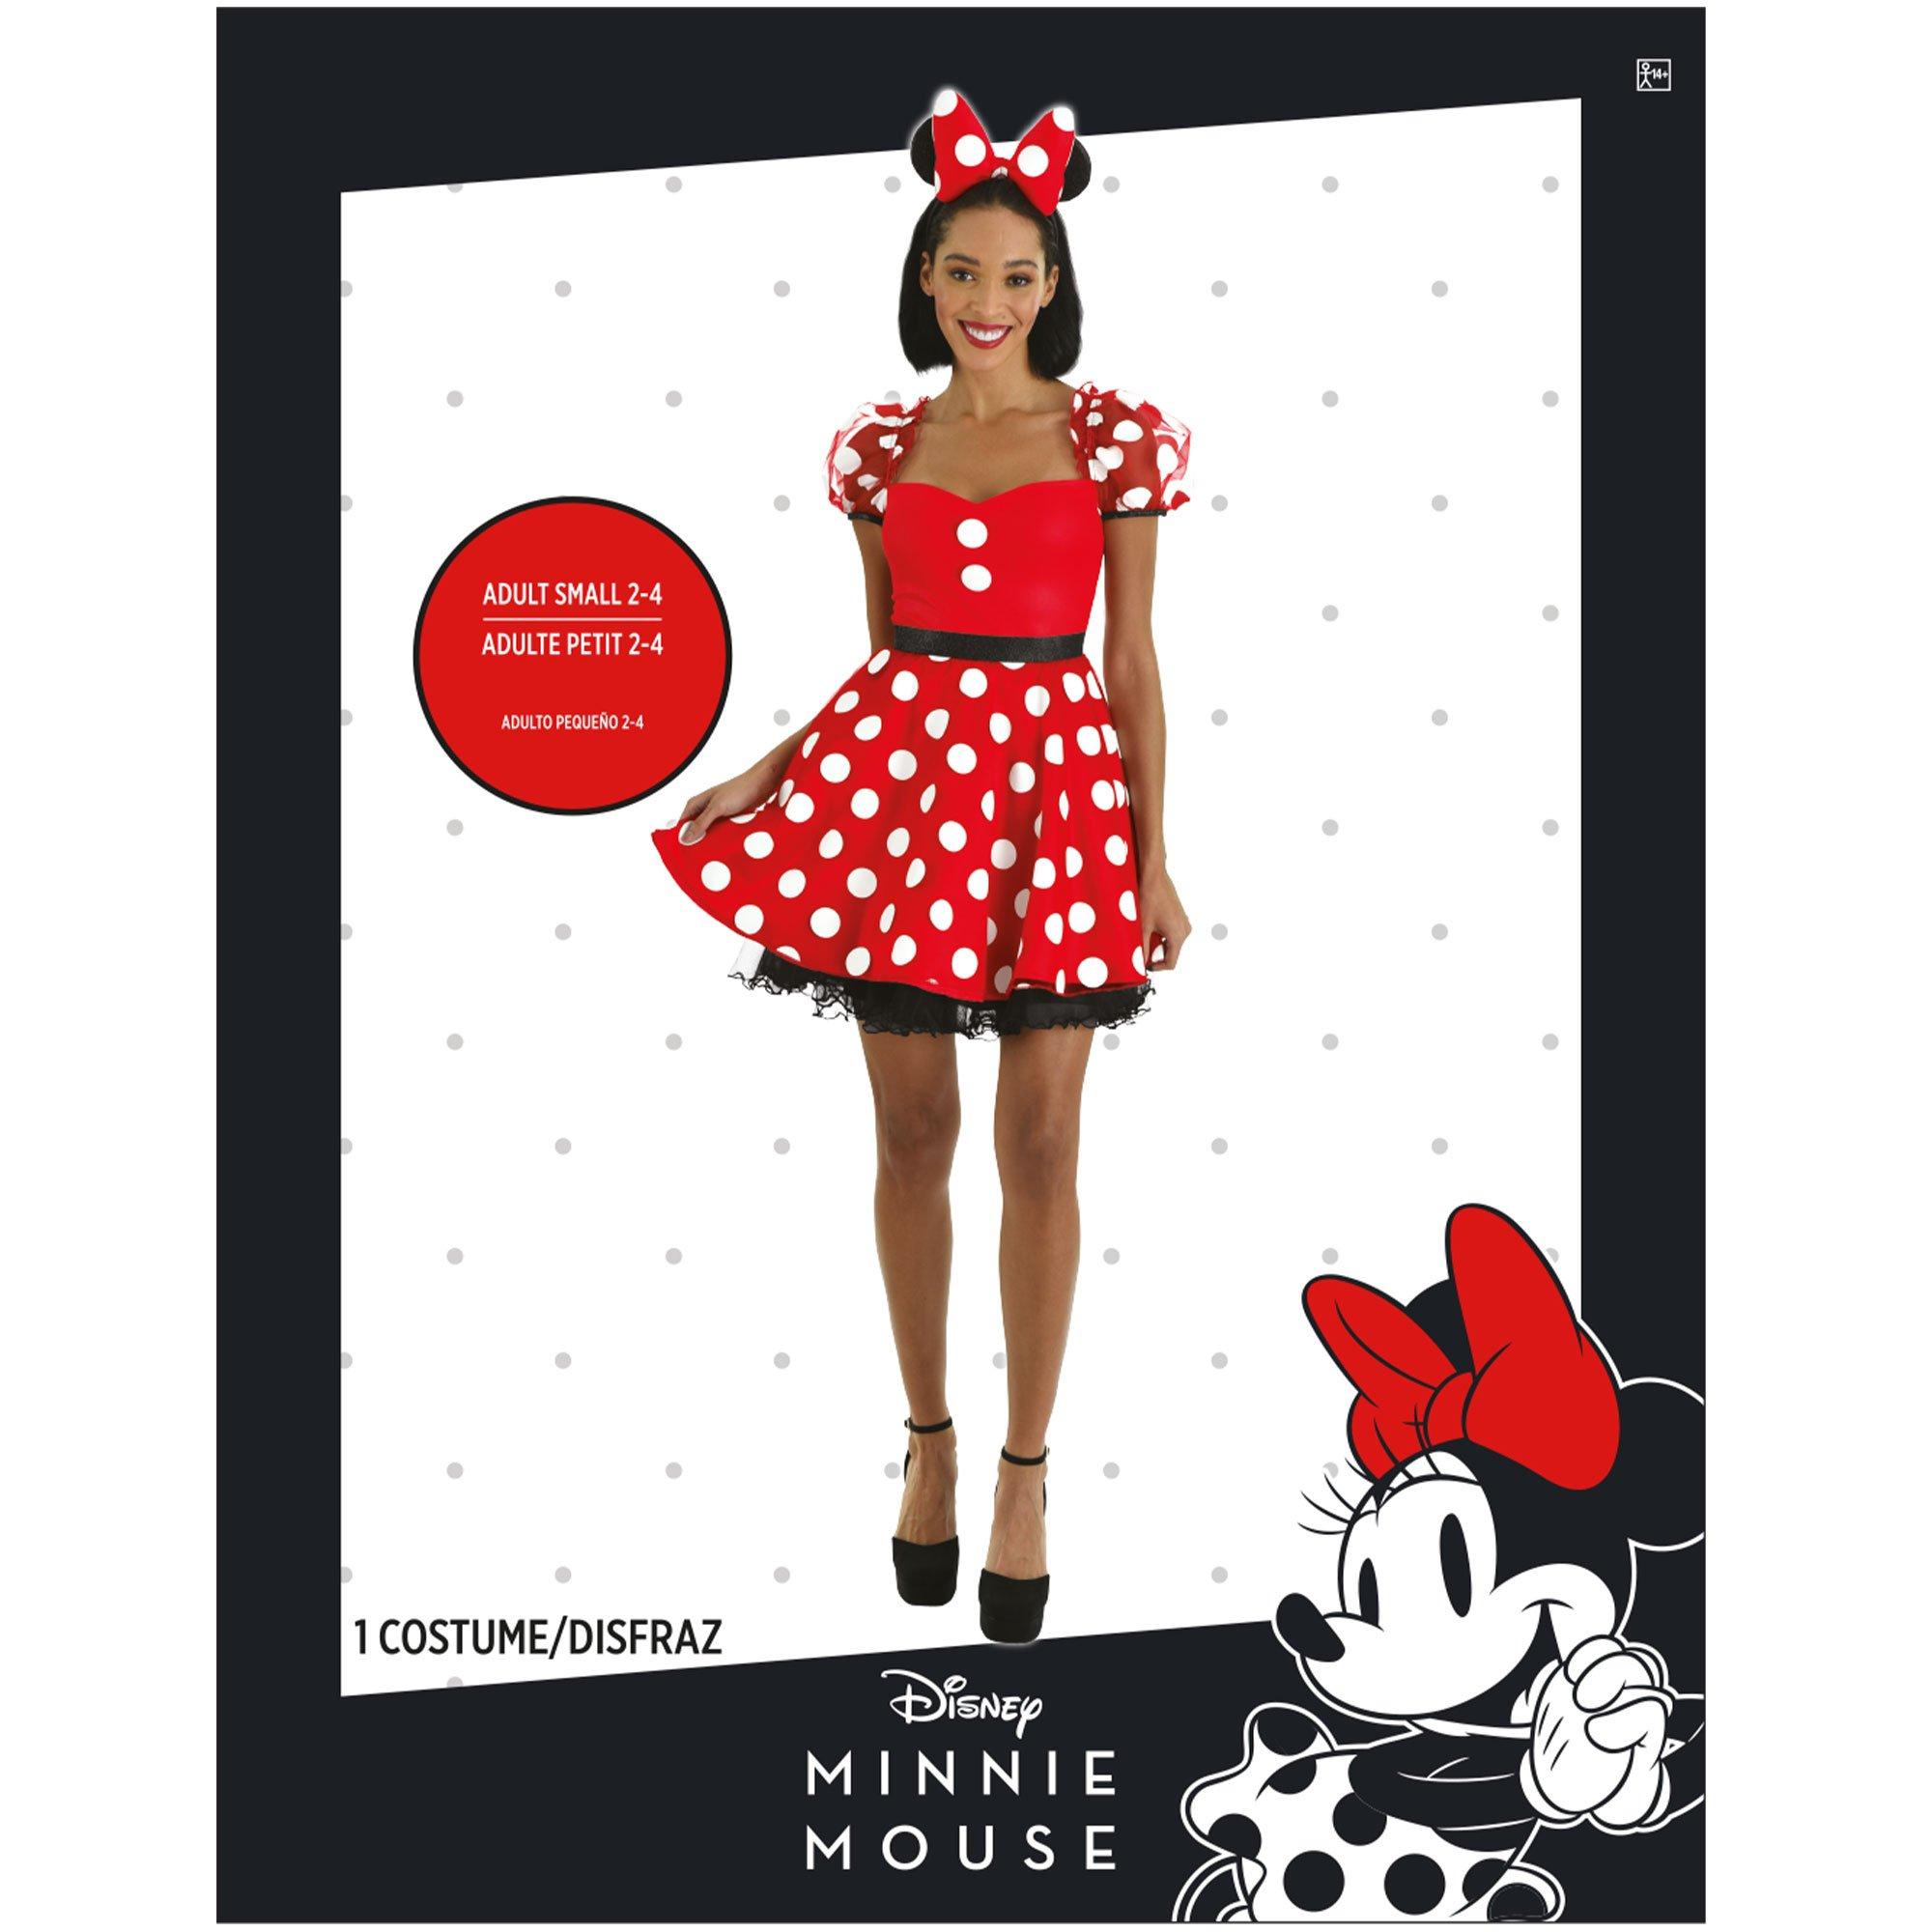 Minnie Mouse Pink Dress Official Disney Cardboard Cutout / Standee